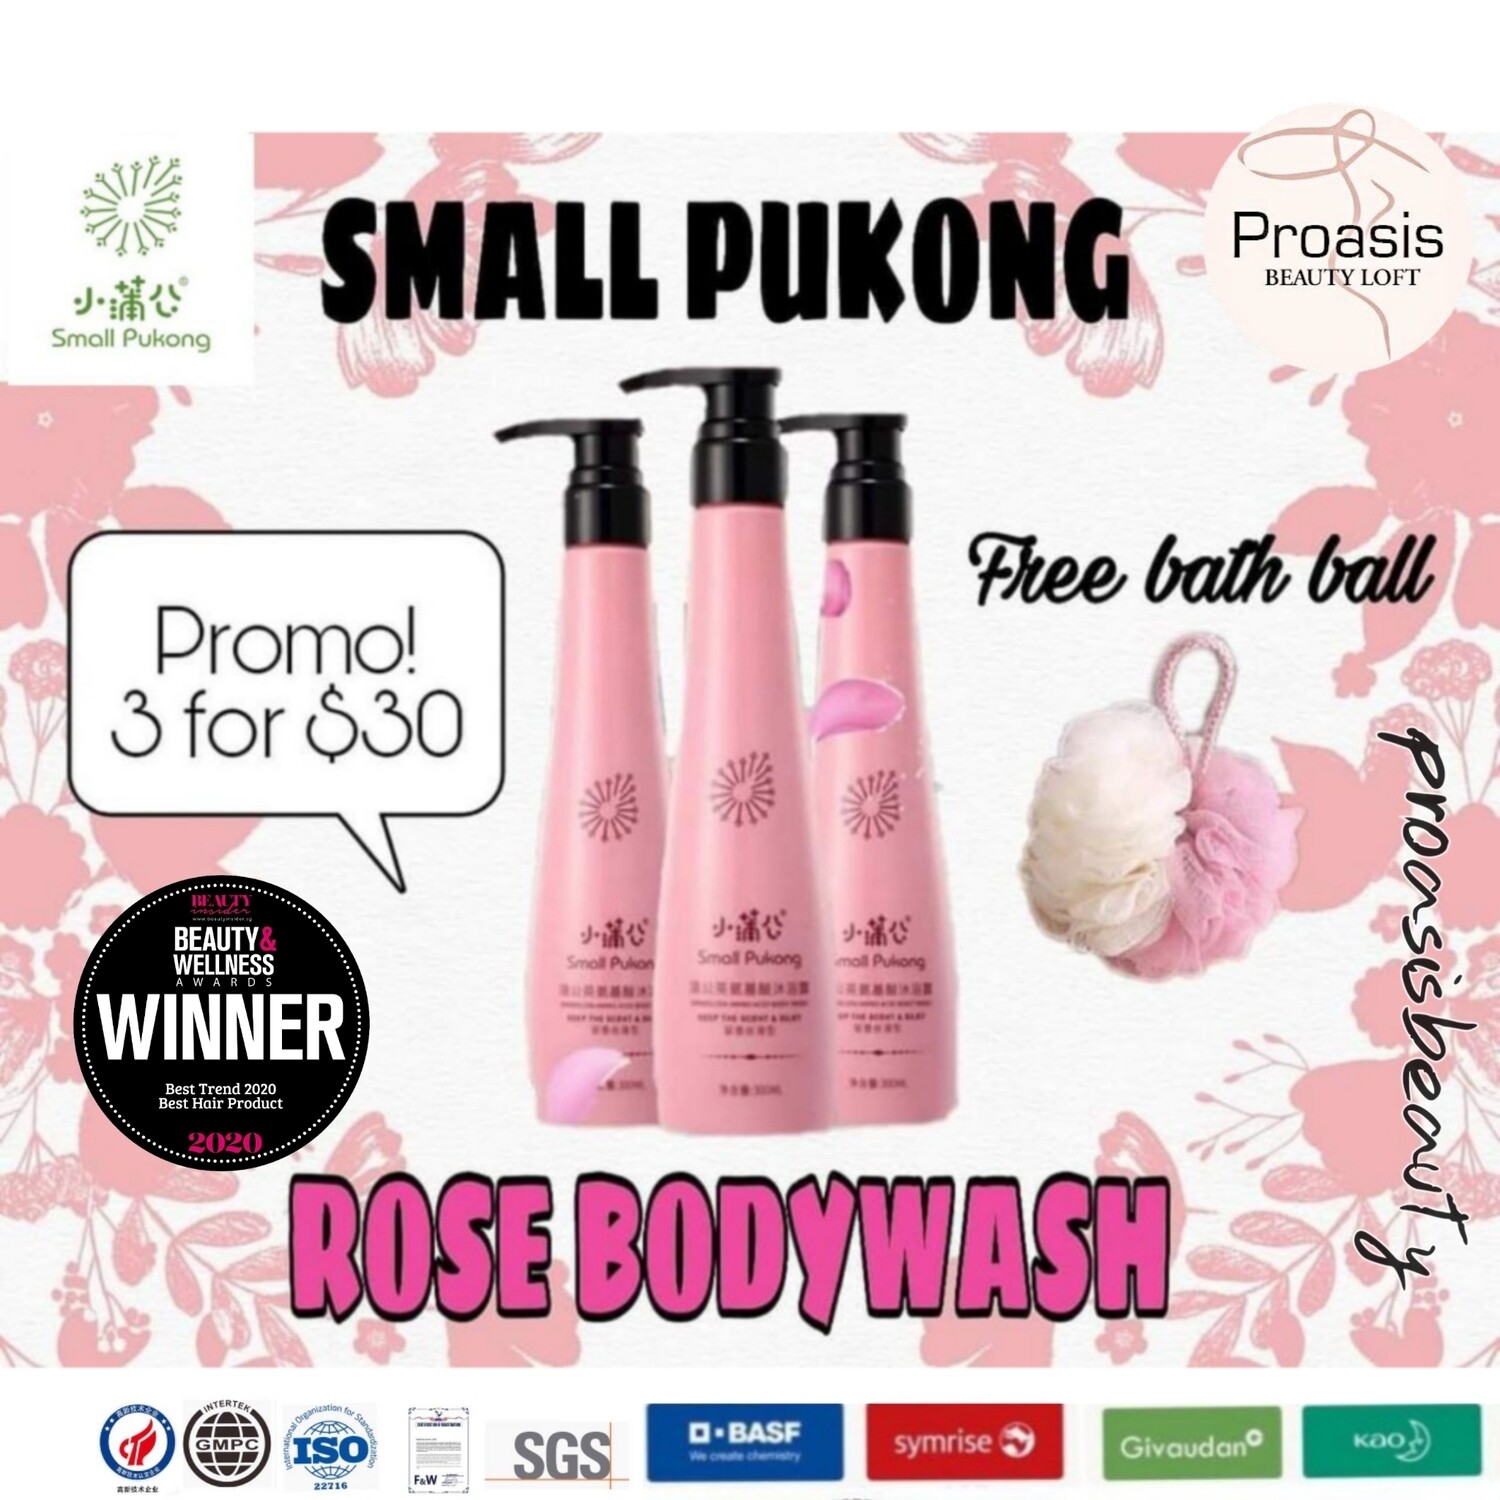 Small Pukong Rose Body Wash (300ml) Promo 3 bottles for $30